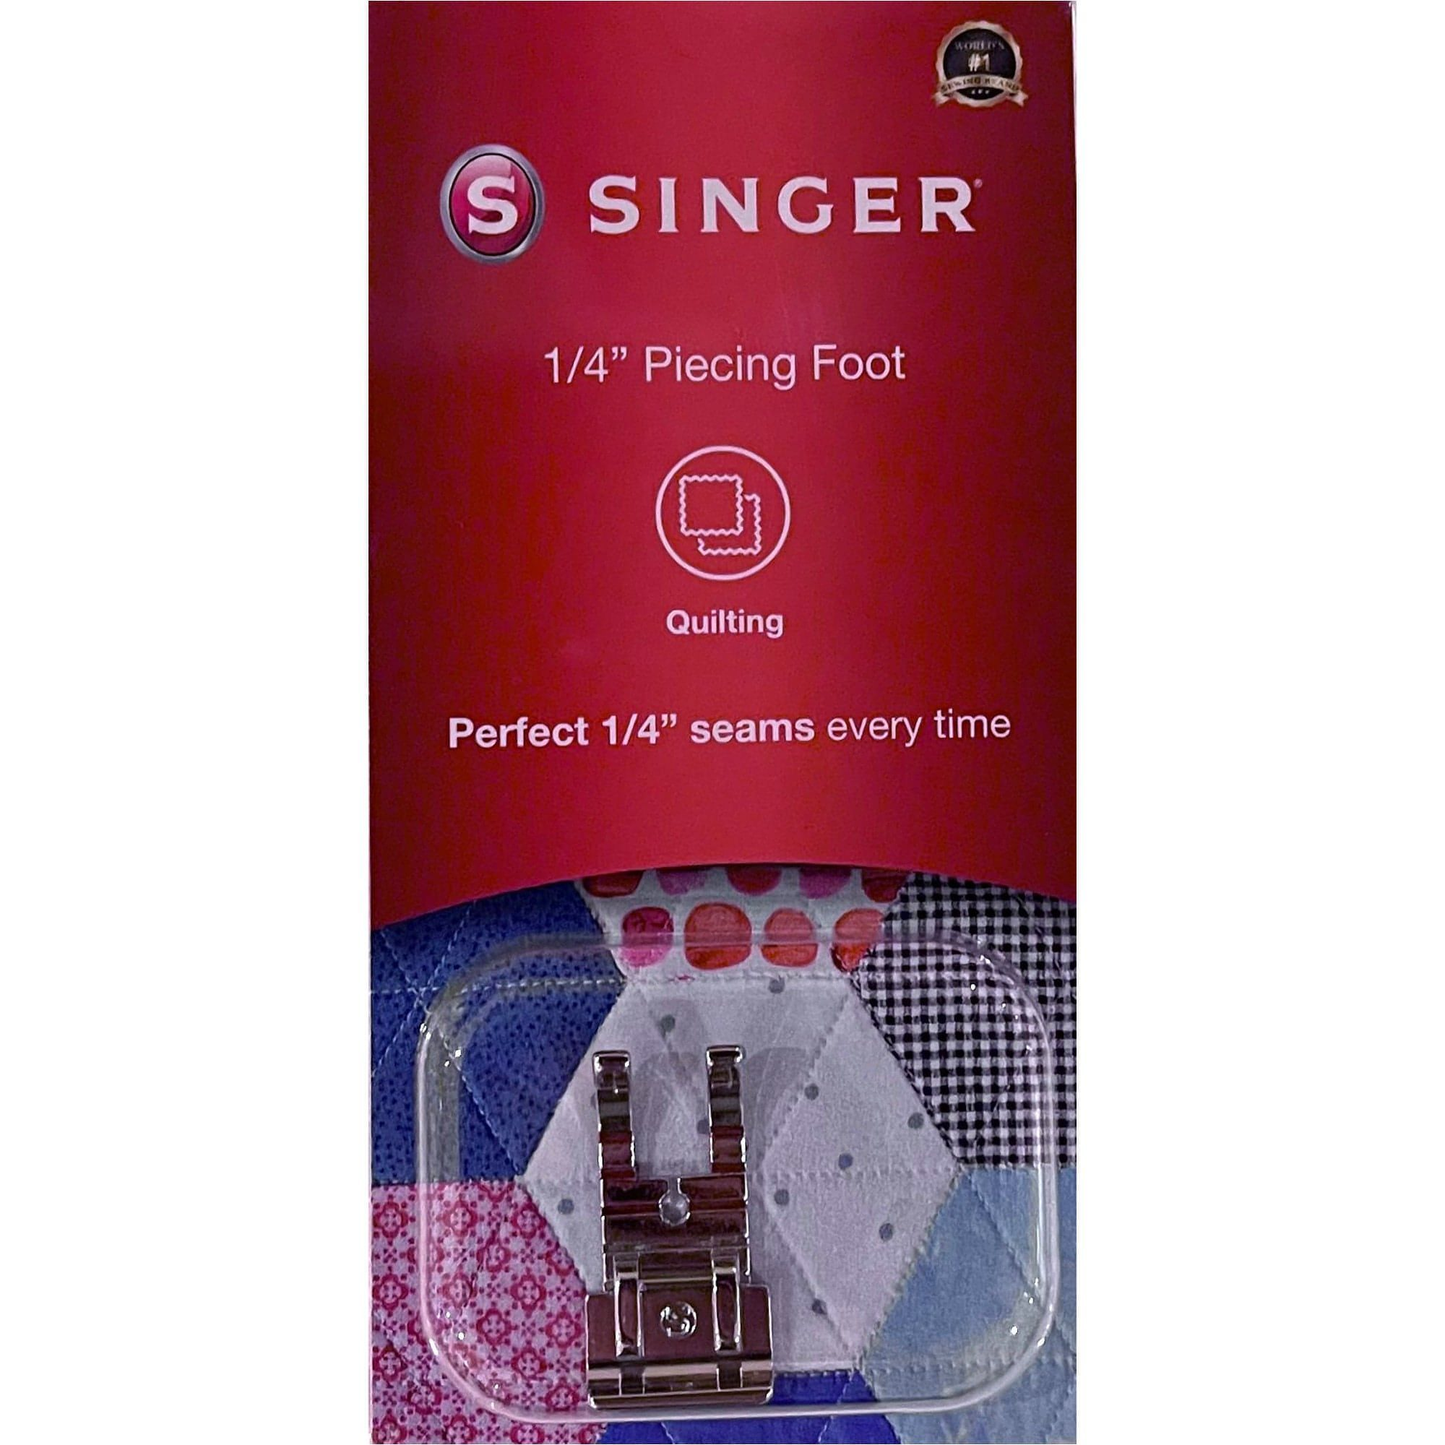 1/4inch piecing foot (quilting foot) by Singer